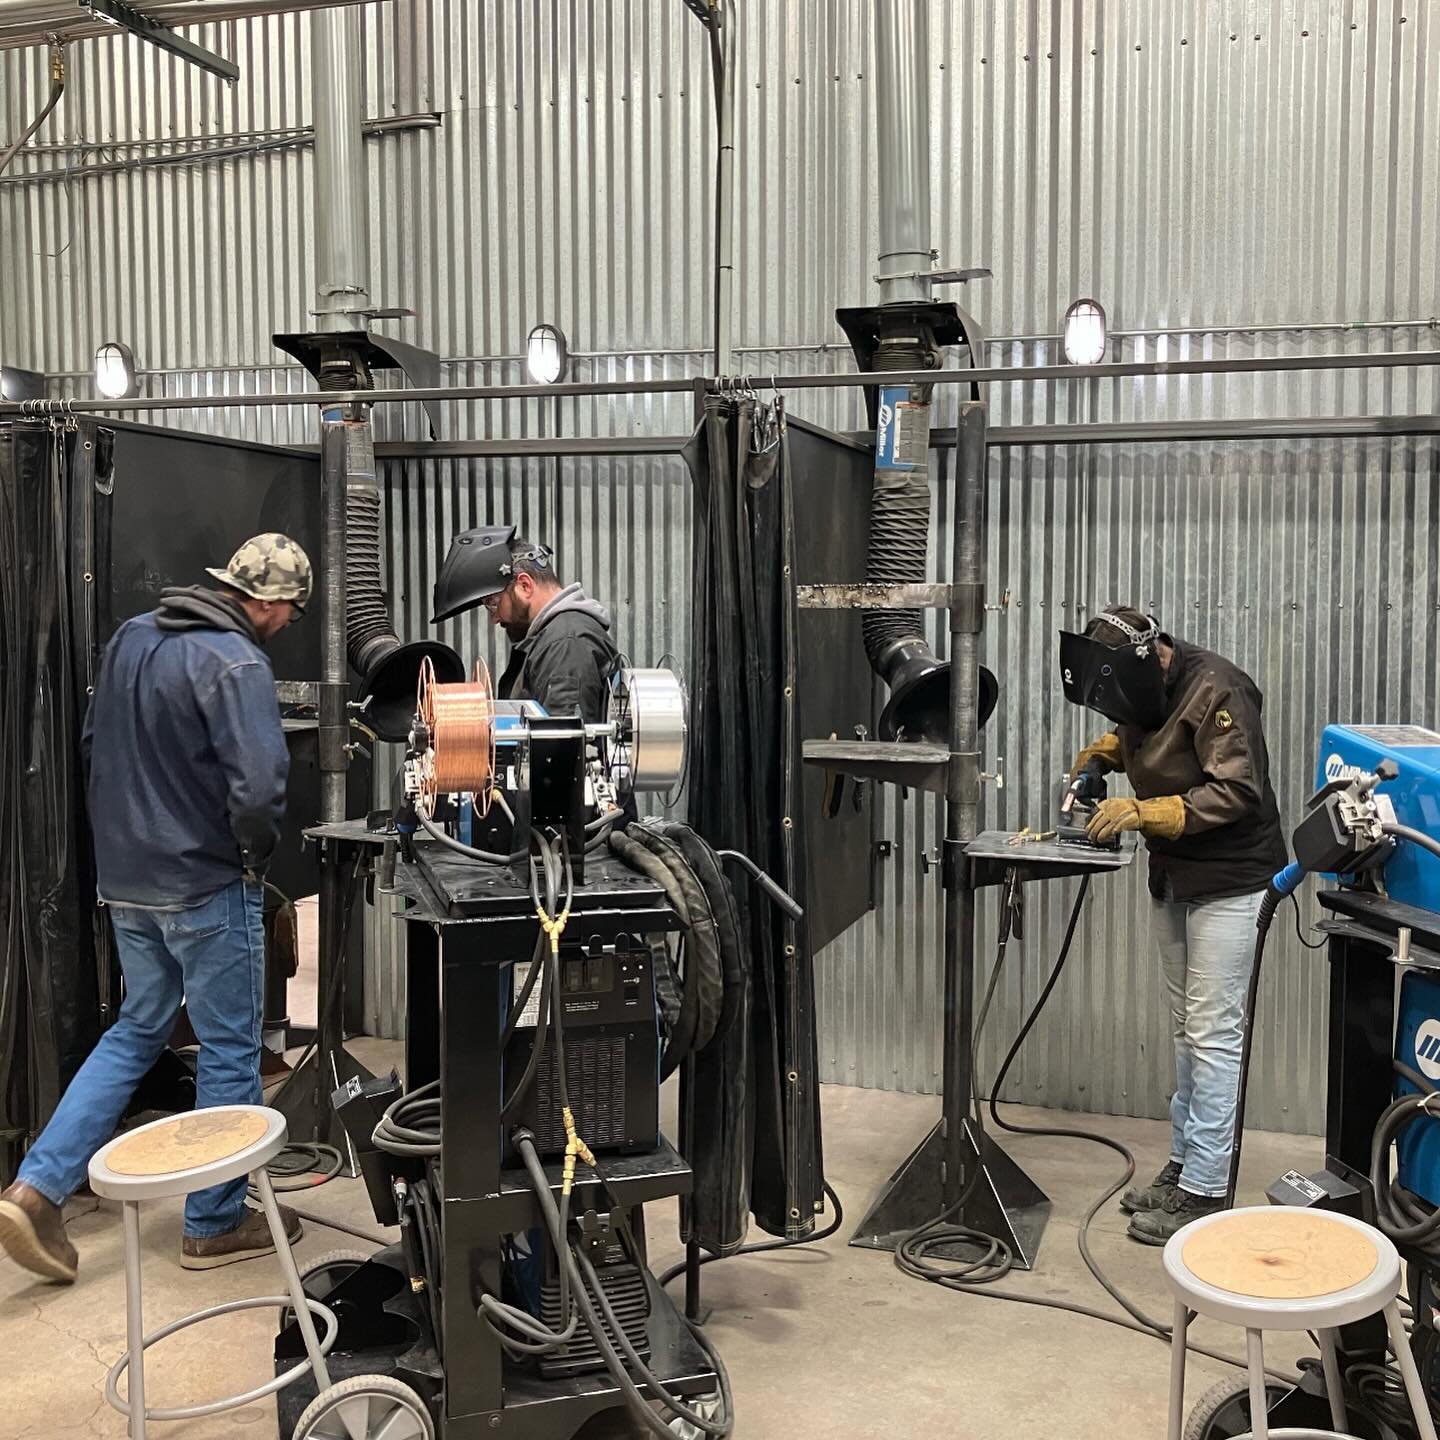 Fun opportunity for first responders to try a new skill of welding, or to hone in on a their current hobby. We love to provide a variety of different outings for responders as a healthy outlet on their days off. Thank you to @mikeladd701 for setting 